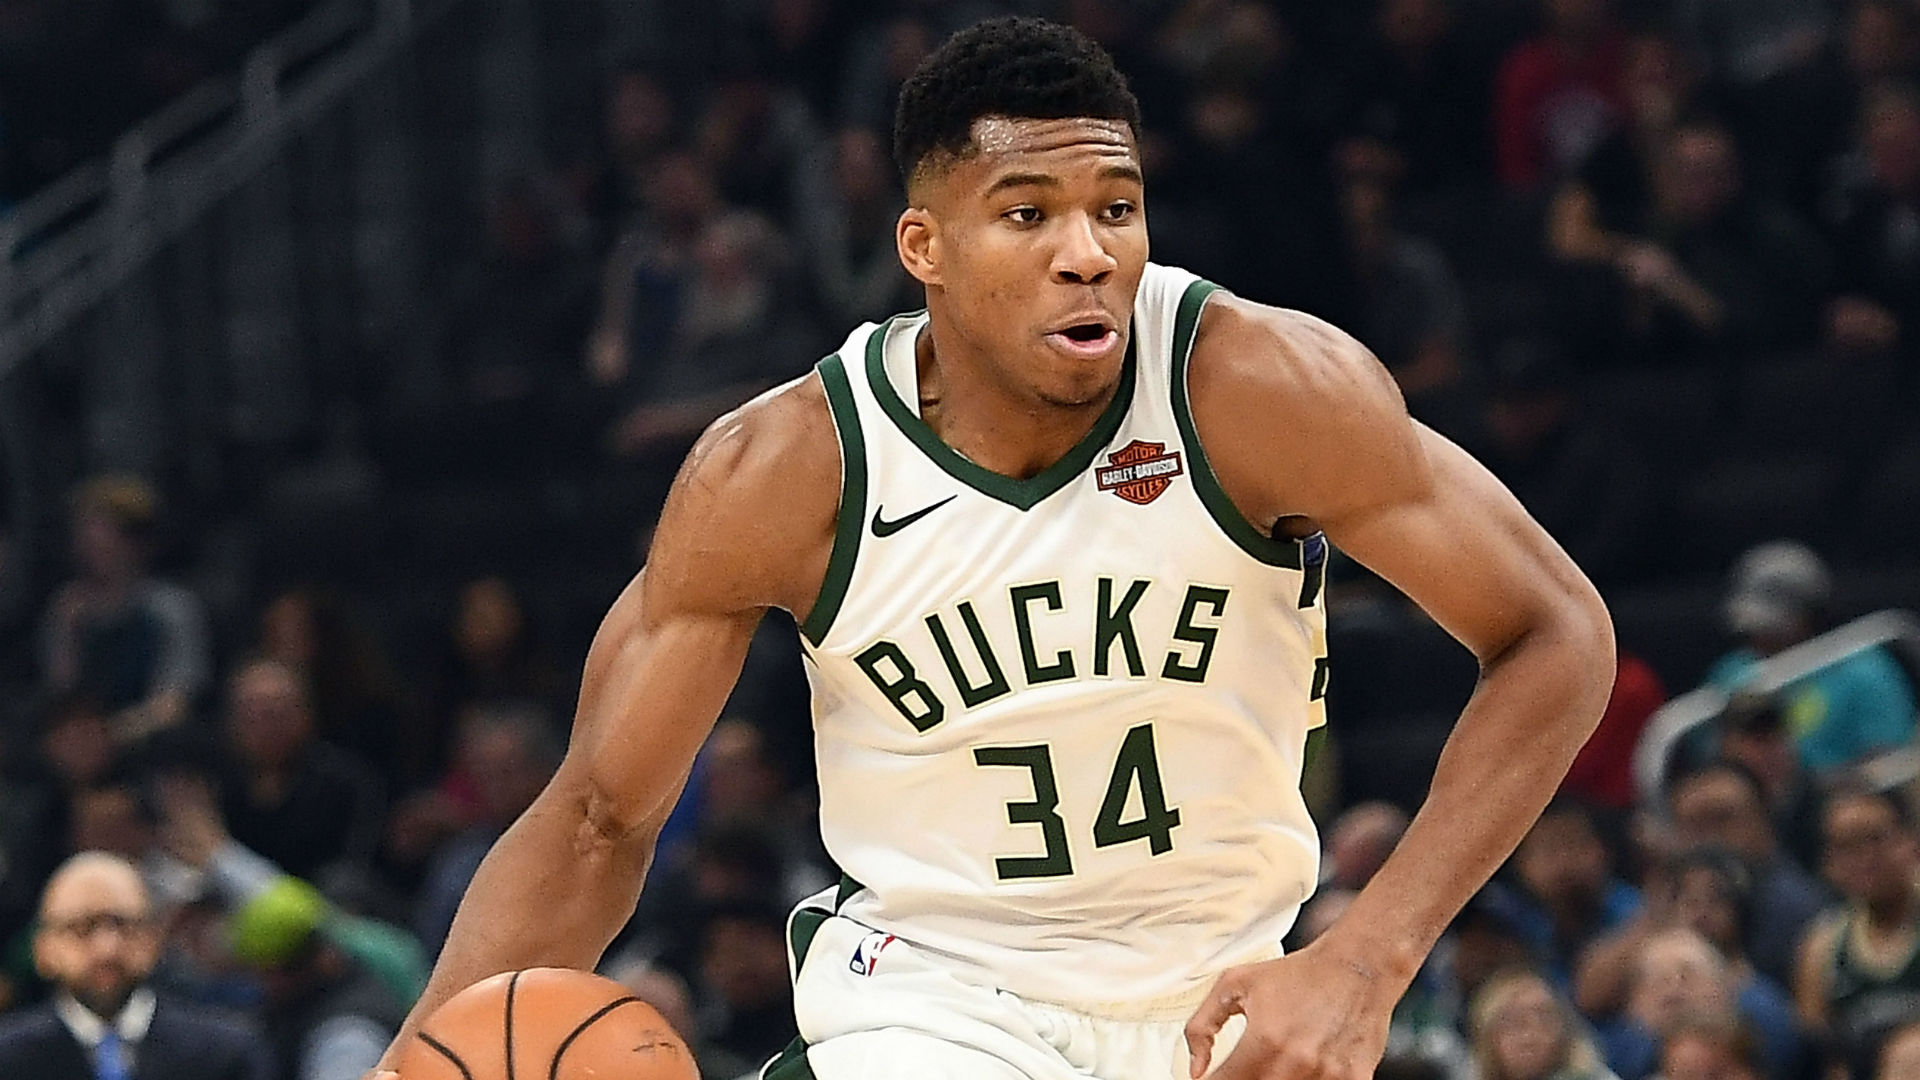 Giannis Antetokounmpo strengthened his NBA MVP case with 33 points, 19 rebounds and 11 assists on Wednesday.